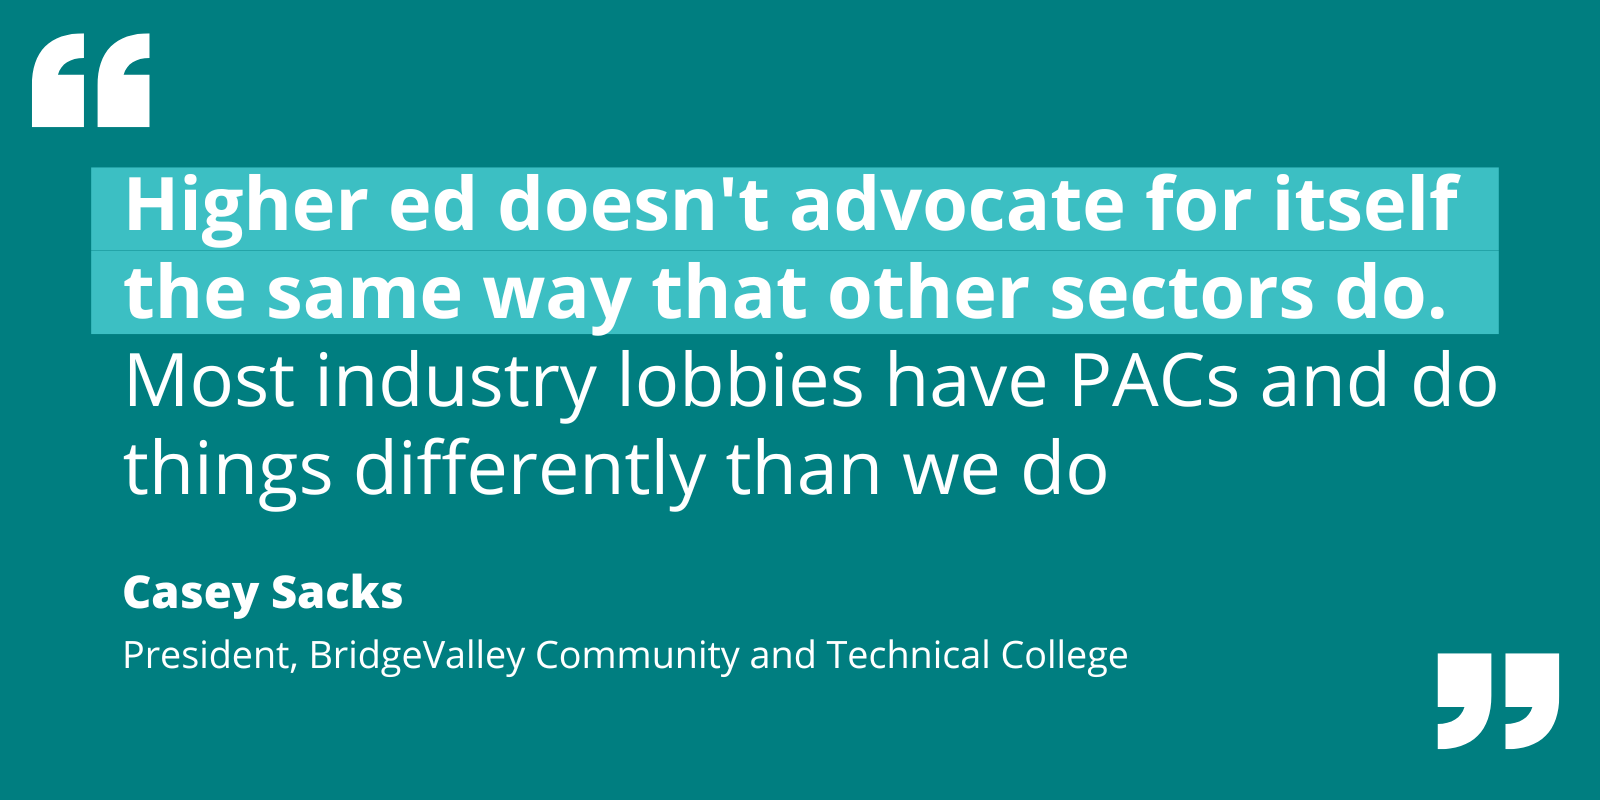 Quote: higher ed doesn't advocate for itself the same way that other sectors do. Most industry lobbies have PACs and do things differently than we do in higher education.